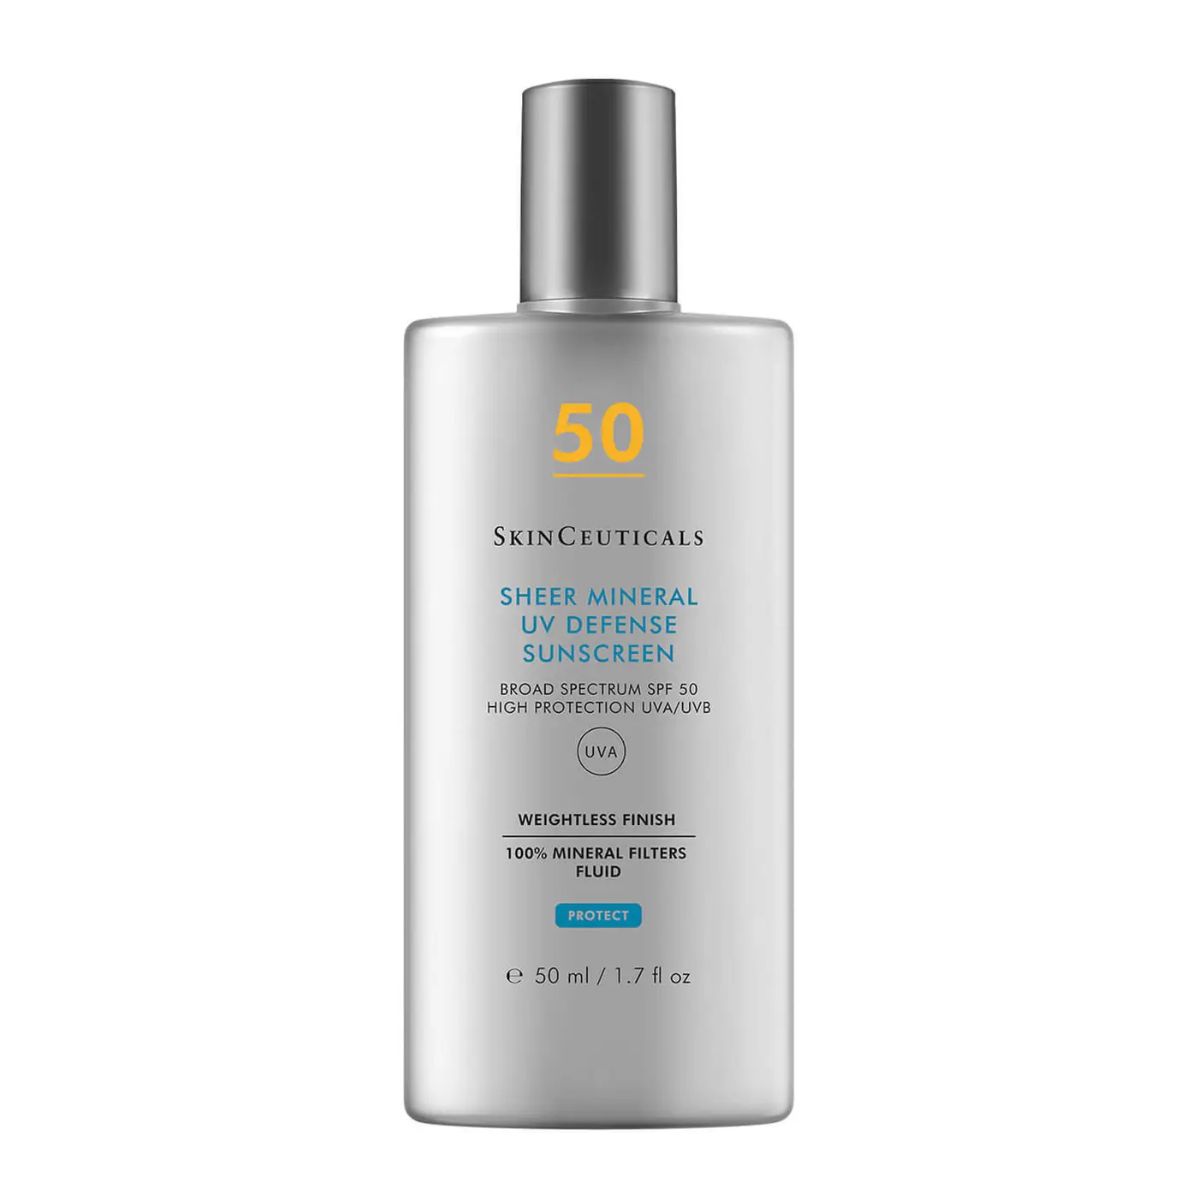 Skinceuticals Sheer Mineral UV Defense Spf50 Sunscreen Protection